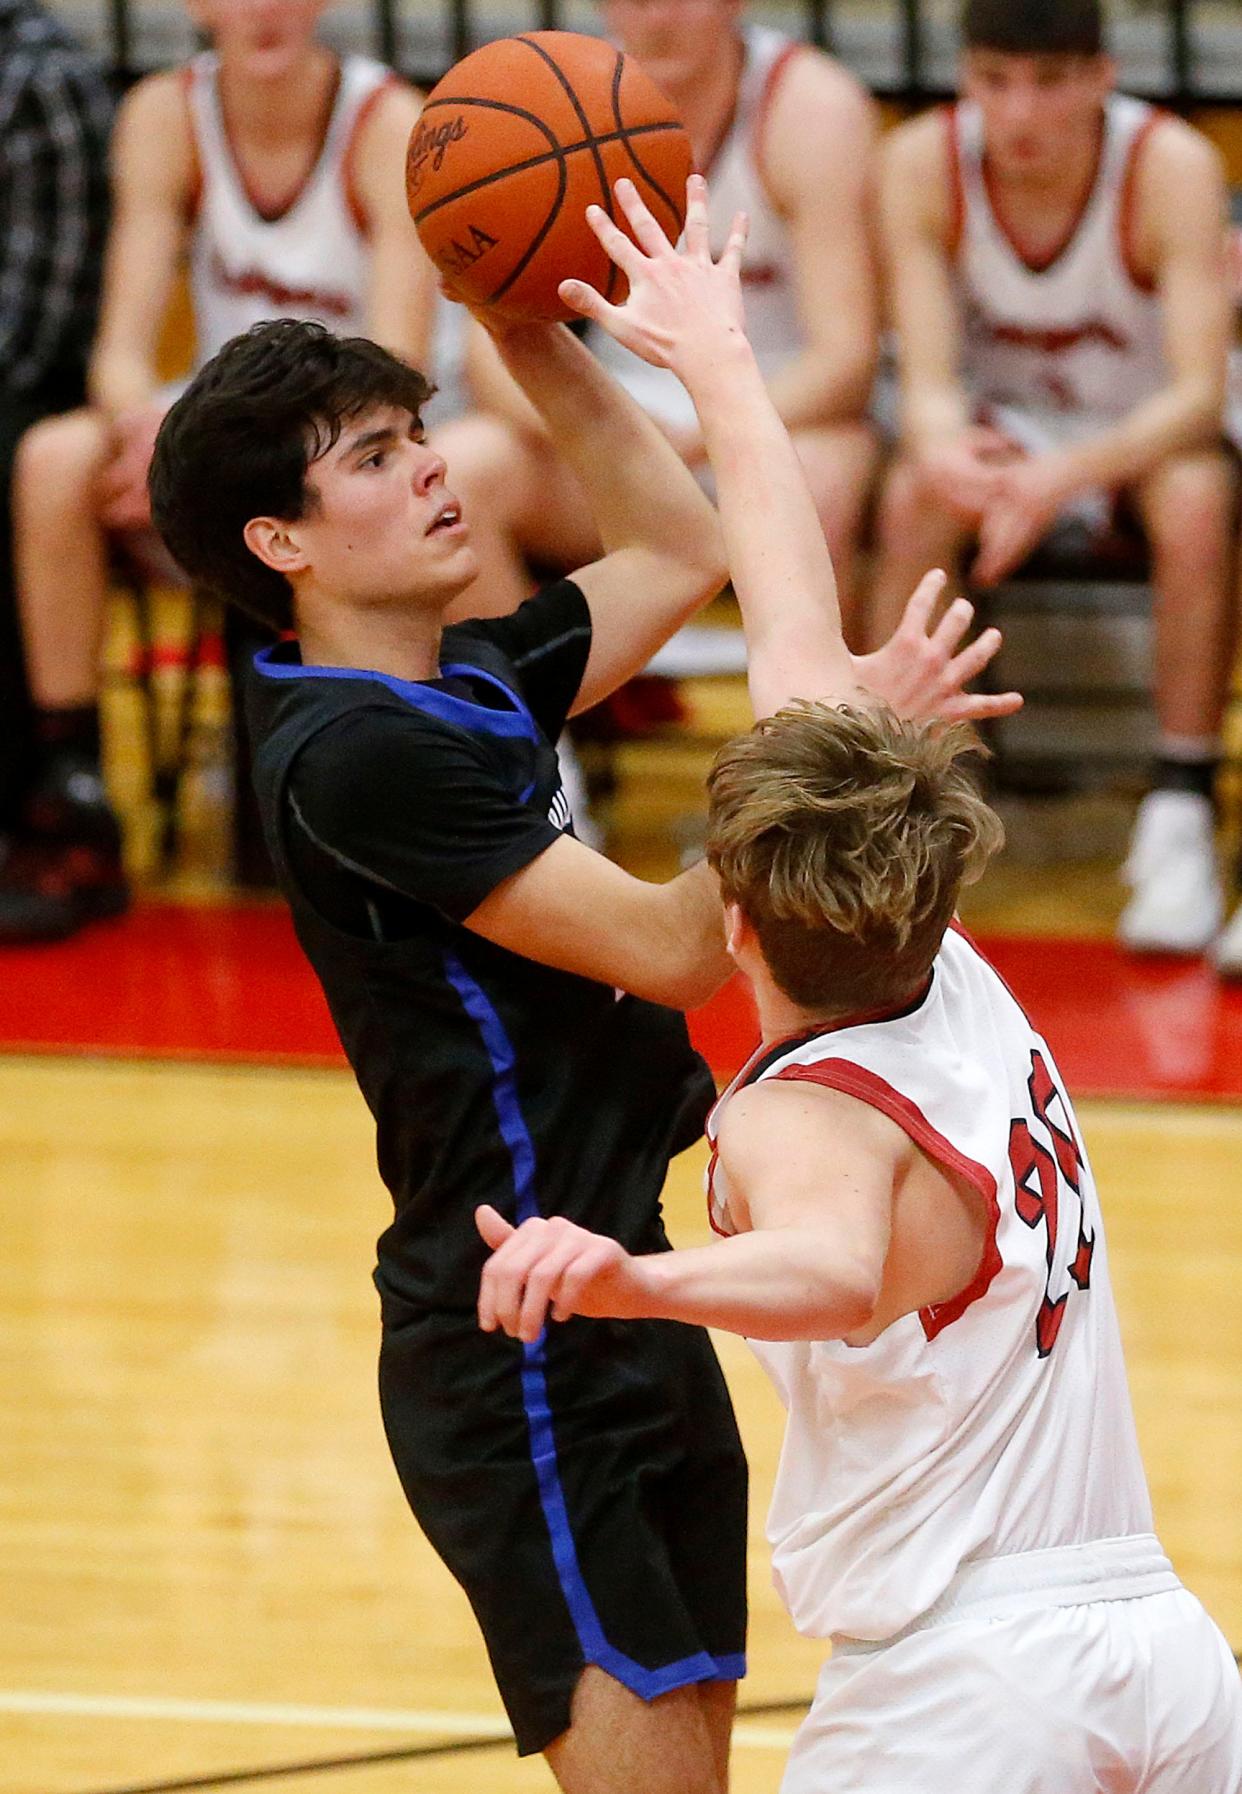 Mapleton High School's Scotty Hickey (21) puts up a shot against Crestview High School's Justice Thompson (20) during high school boys basketball action at Crestview High School Thursday, Feb. 9, 2023. TOM E. PUSKAR/ASHLAND TIMES-GAZETTE